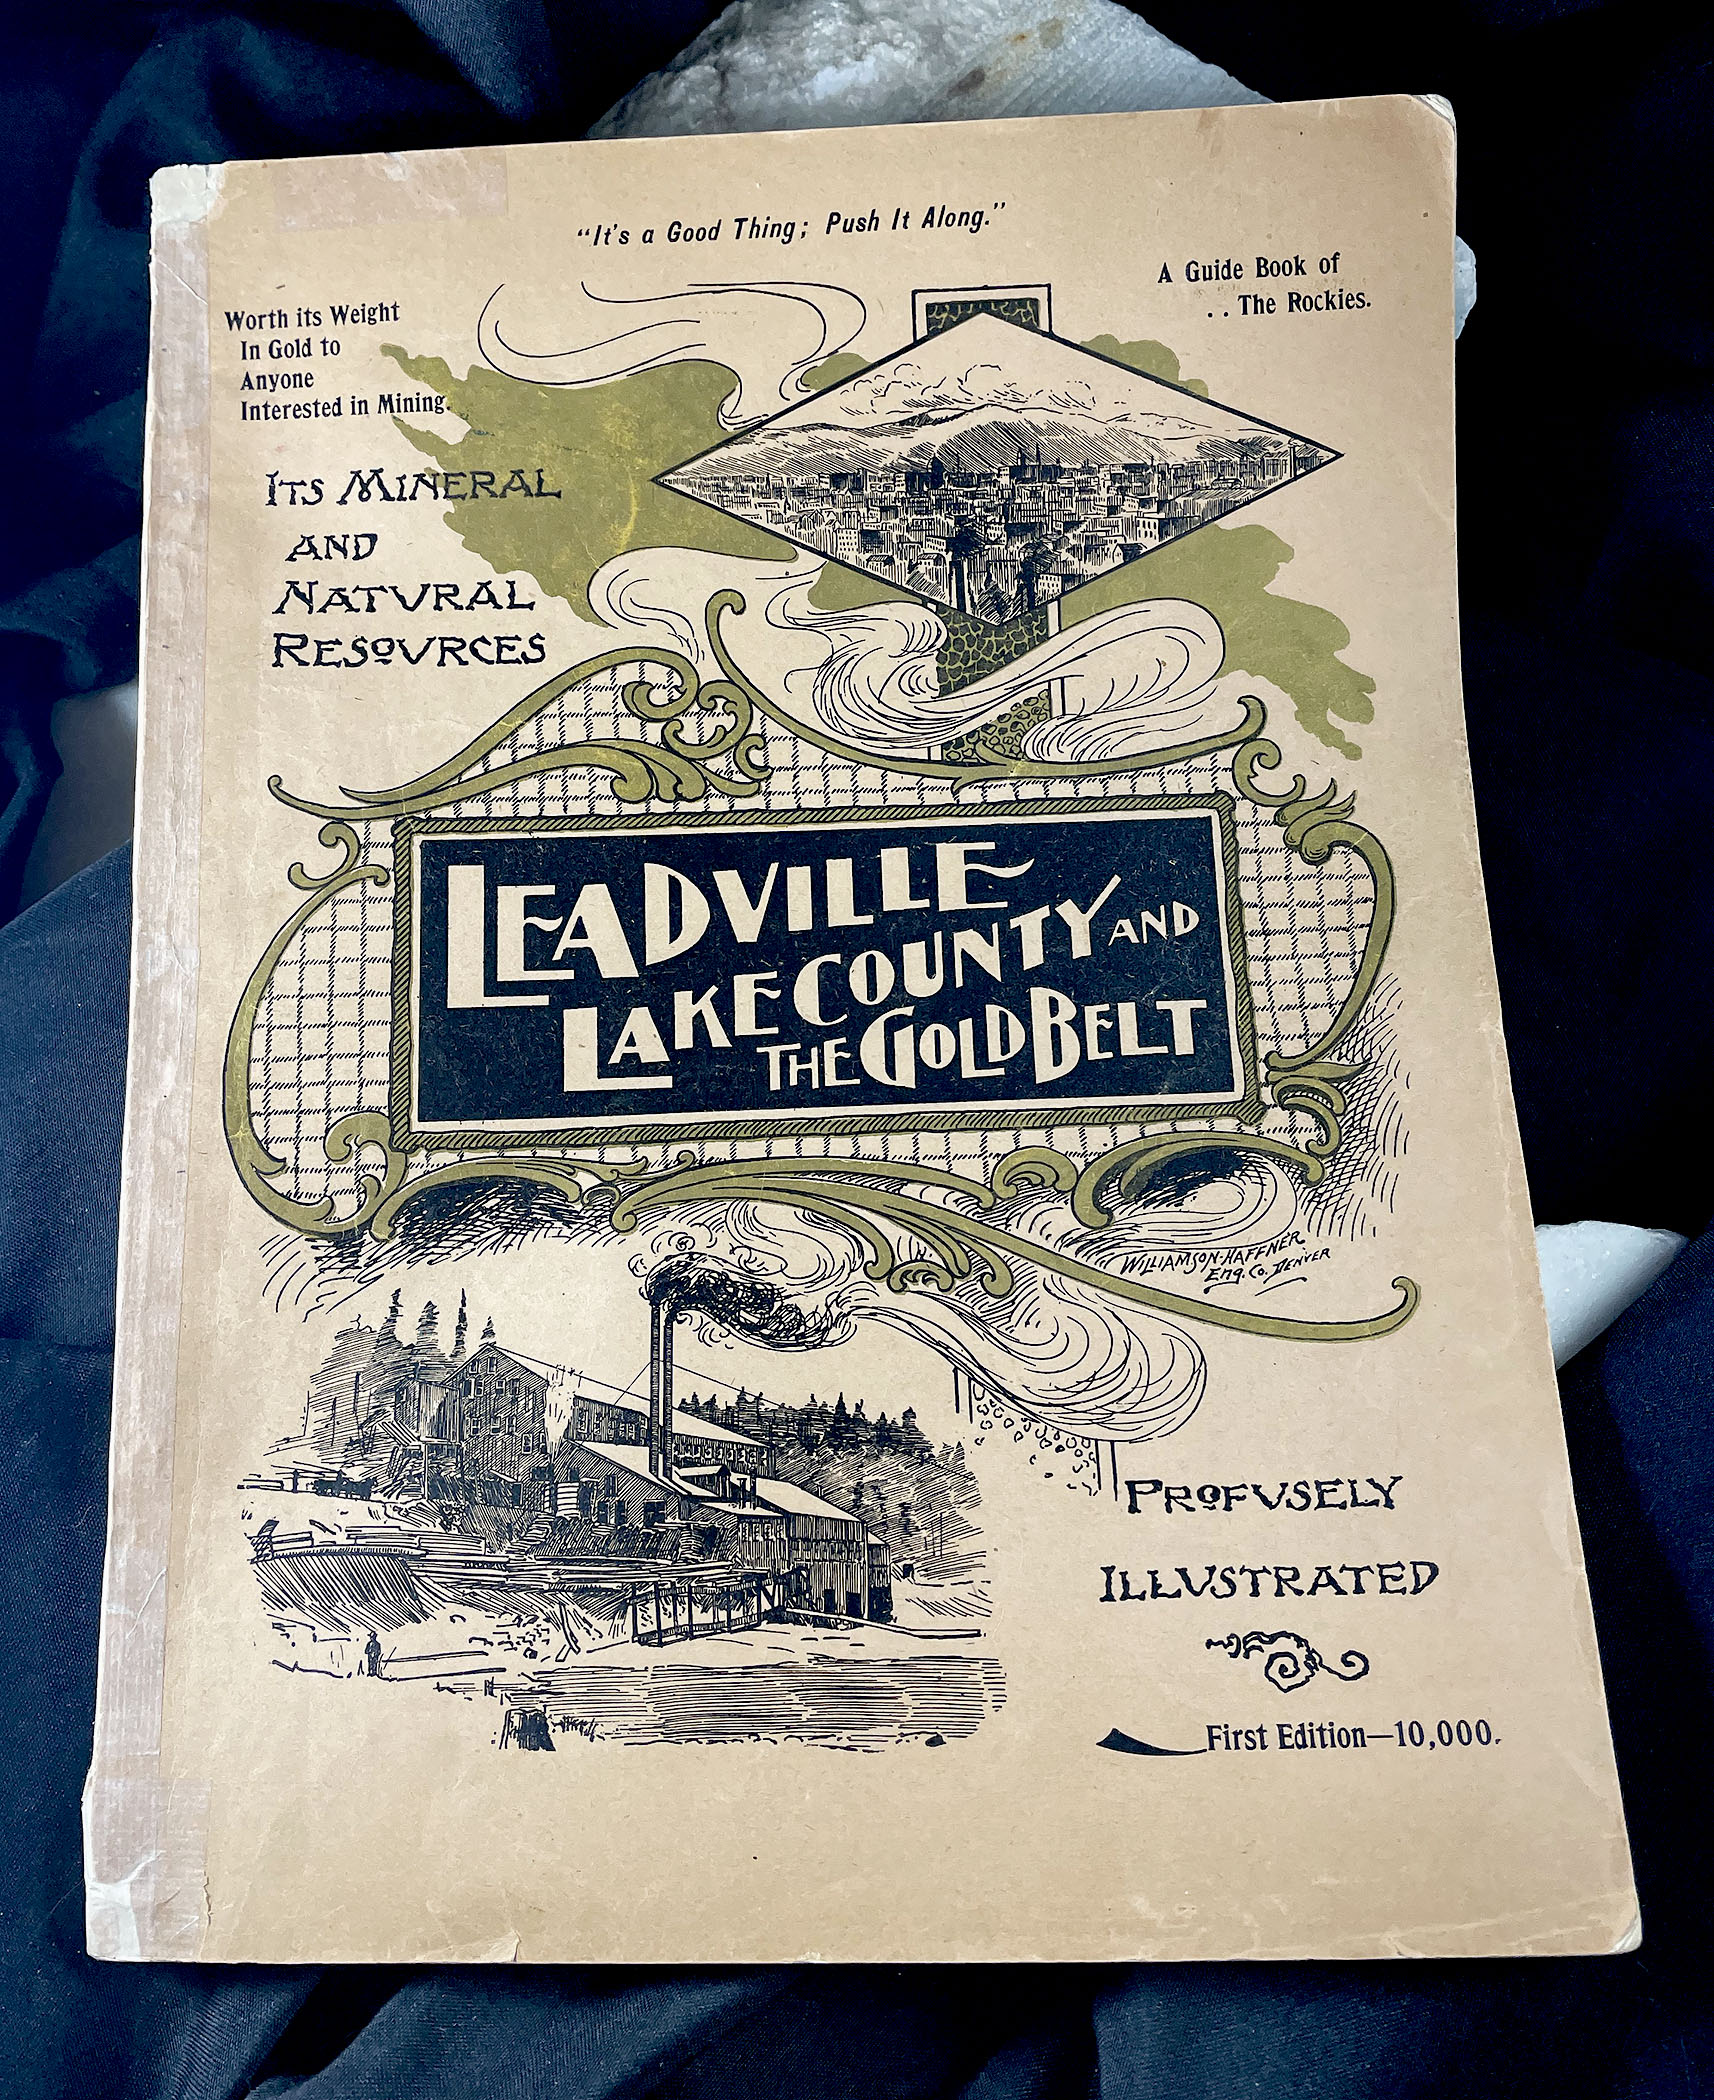 LEADVILLE LAKE COUNTY & GOLD BELT COLORADO by Jay F. Manning first edition book 1895